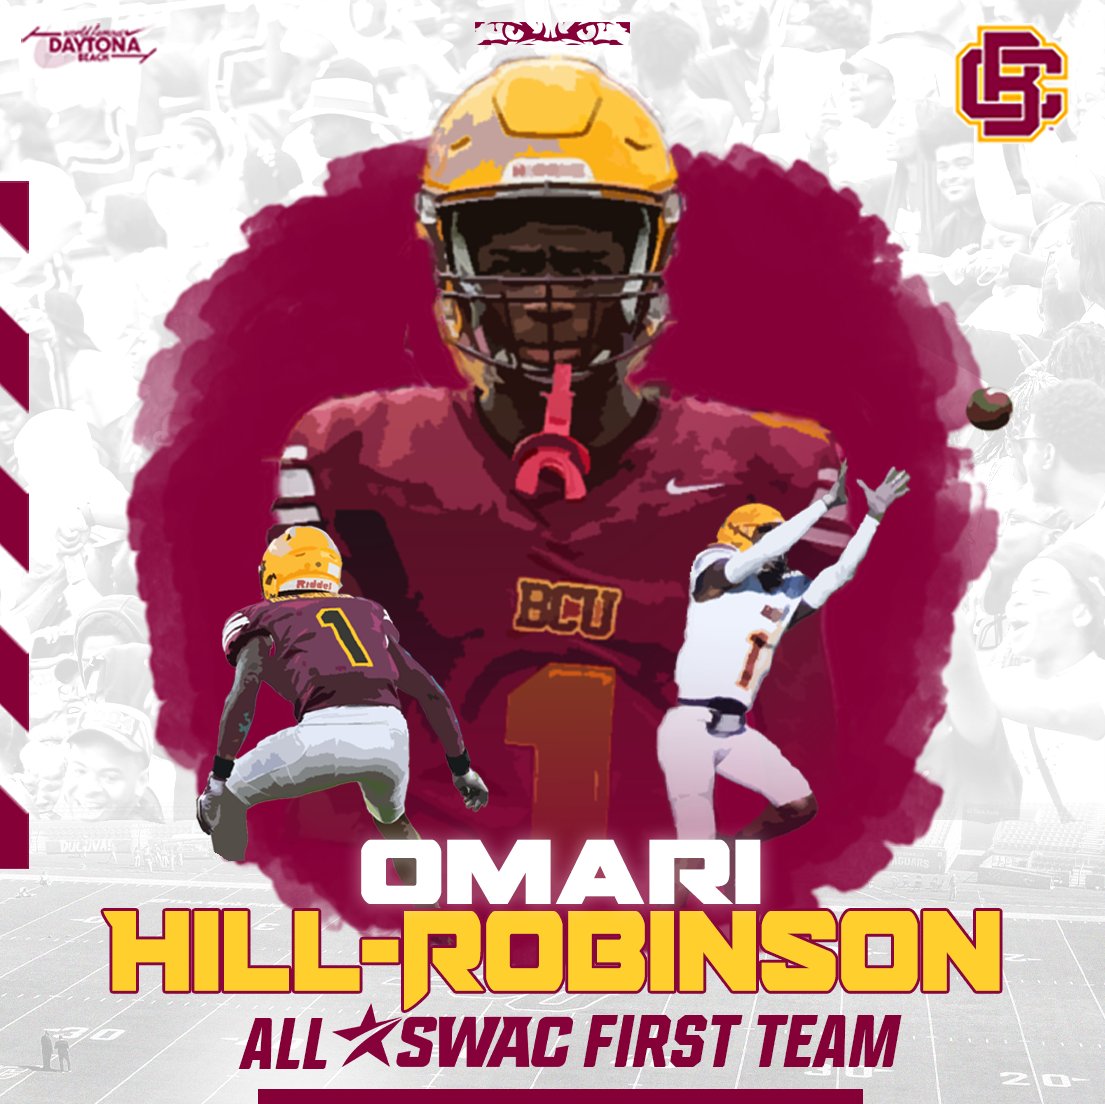 𝗔𝗟𝗥𝗘𝗔𝗗𝗬 𝗔𝗟𝗟-𝗦𝗪𝗔𝗖! Congratulations to Omari Hill-Robinson and Darnell Deas for being named to the All-SWAC First Team! #𝙇𝙚𝙩𝙨𝙂𝙤 | #𝙃𝙖𝙞𝙡𝙒𝙞𝙡𝙙𝙘𝙖𝙩𝙨 | #𝙋𝙧𝙚𝙮𝙏𝙤𝙜𝙚𝙩𝙝𝙚𝙧